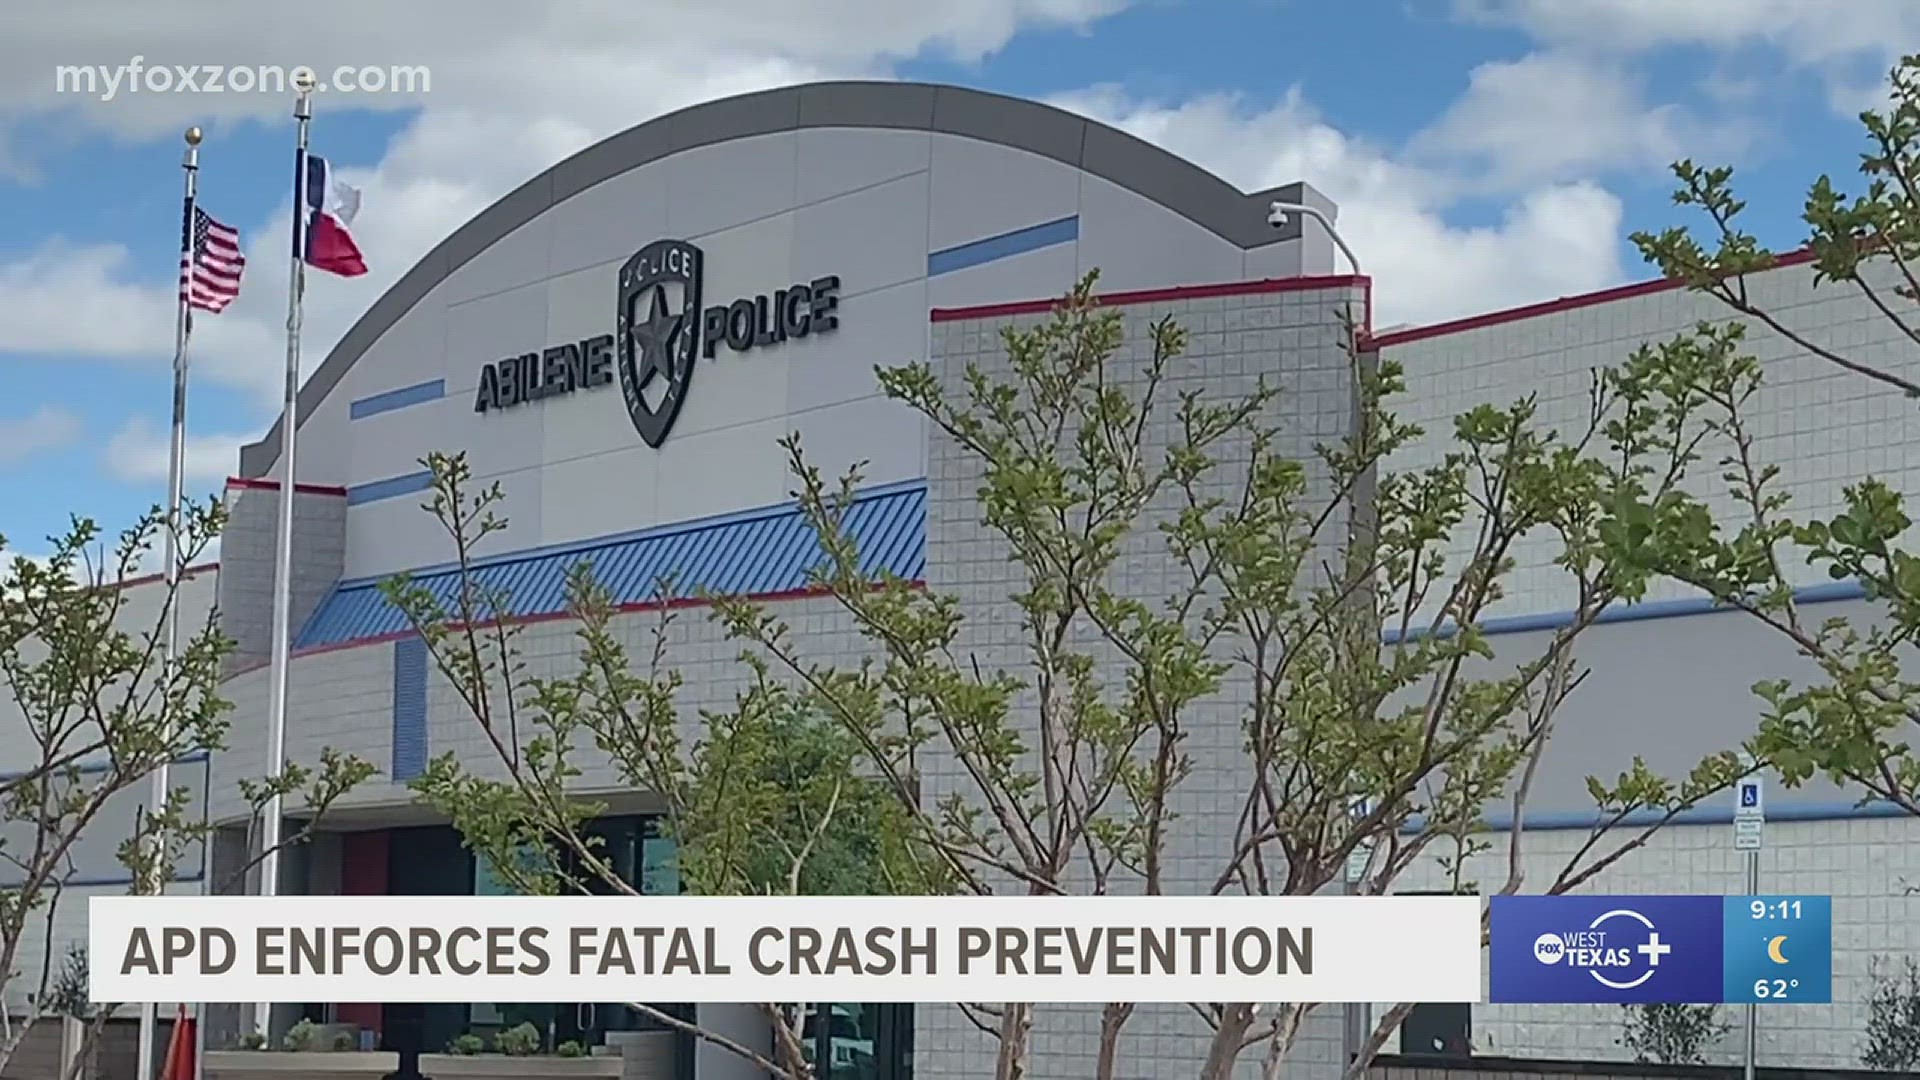 With the uptick in fatal crashes, the Abilene Police Department is looking to curb this deadly trend.